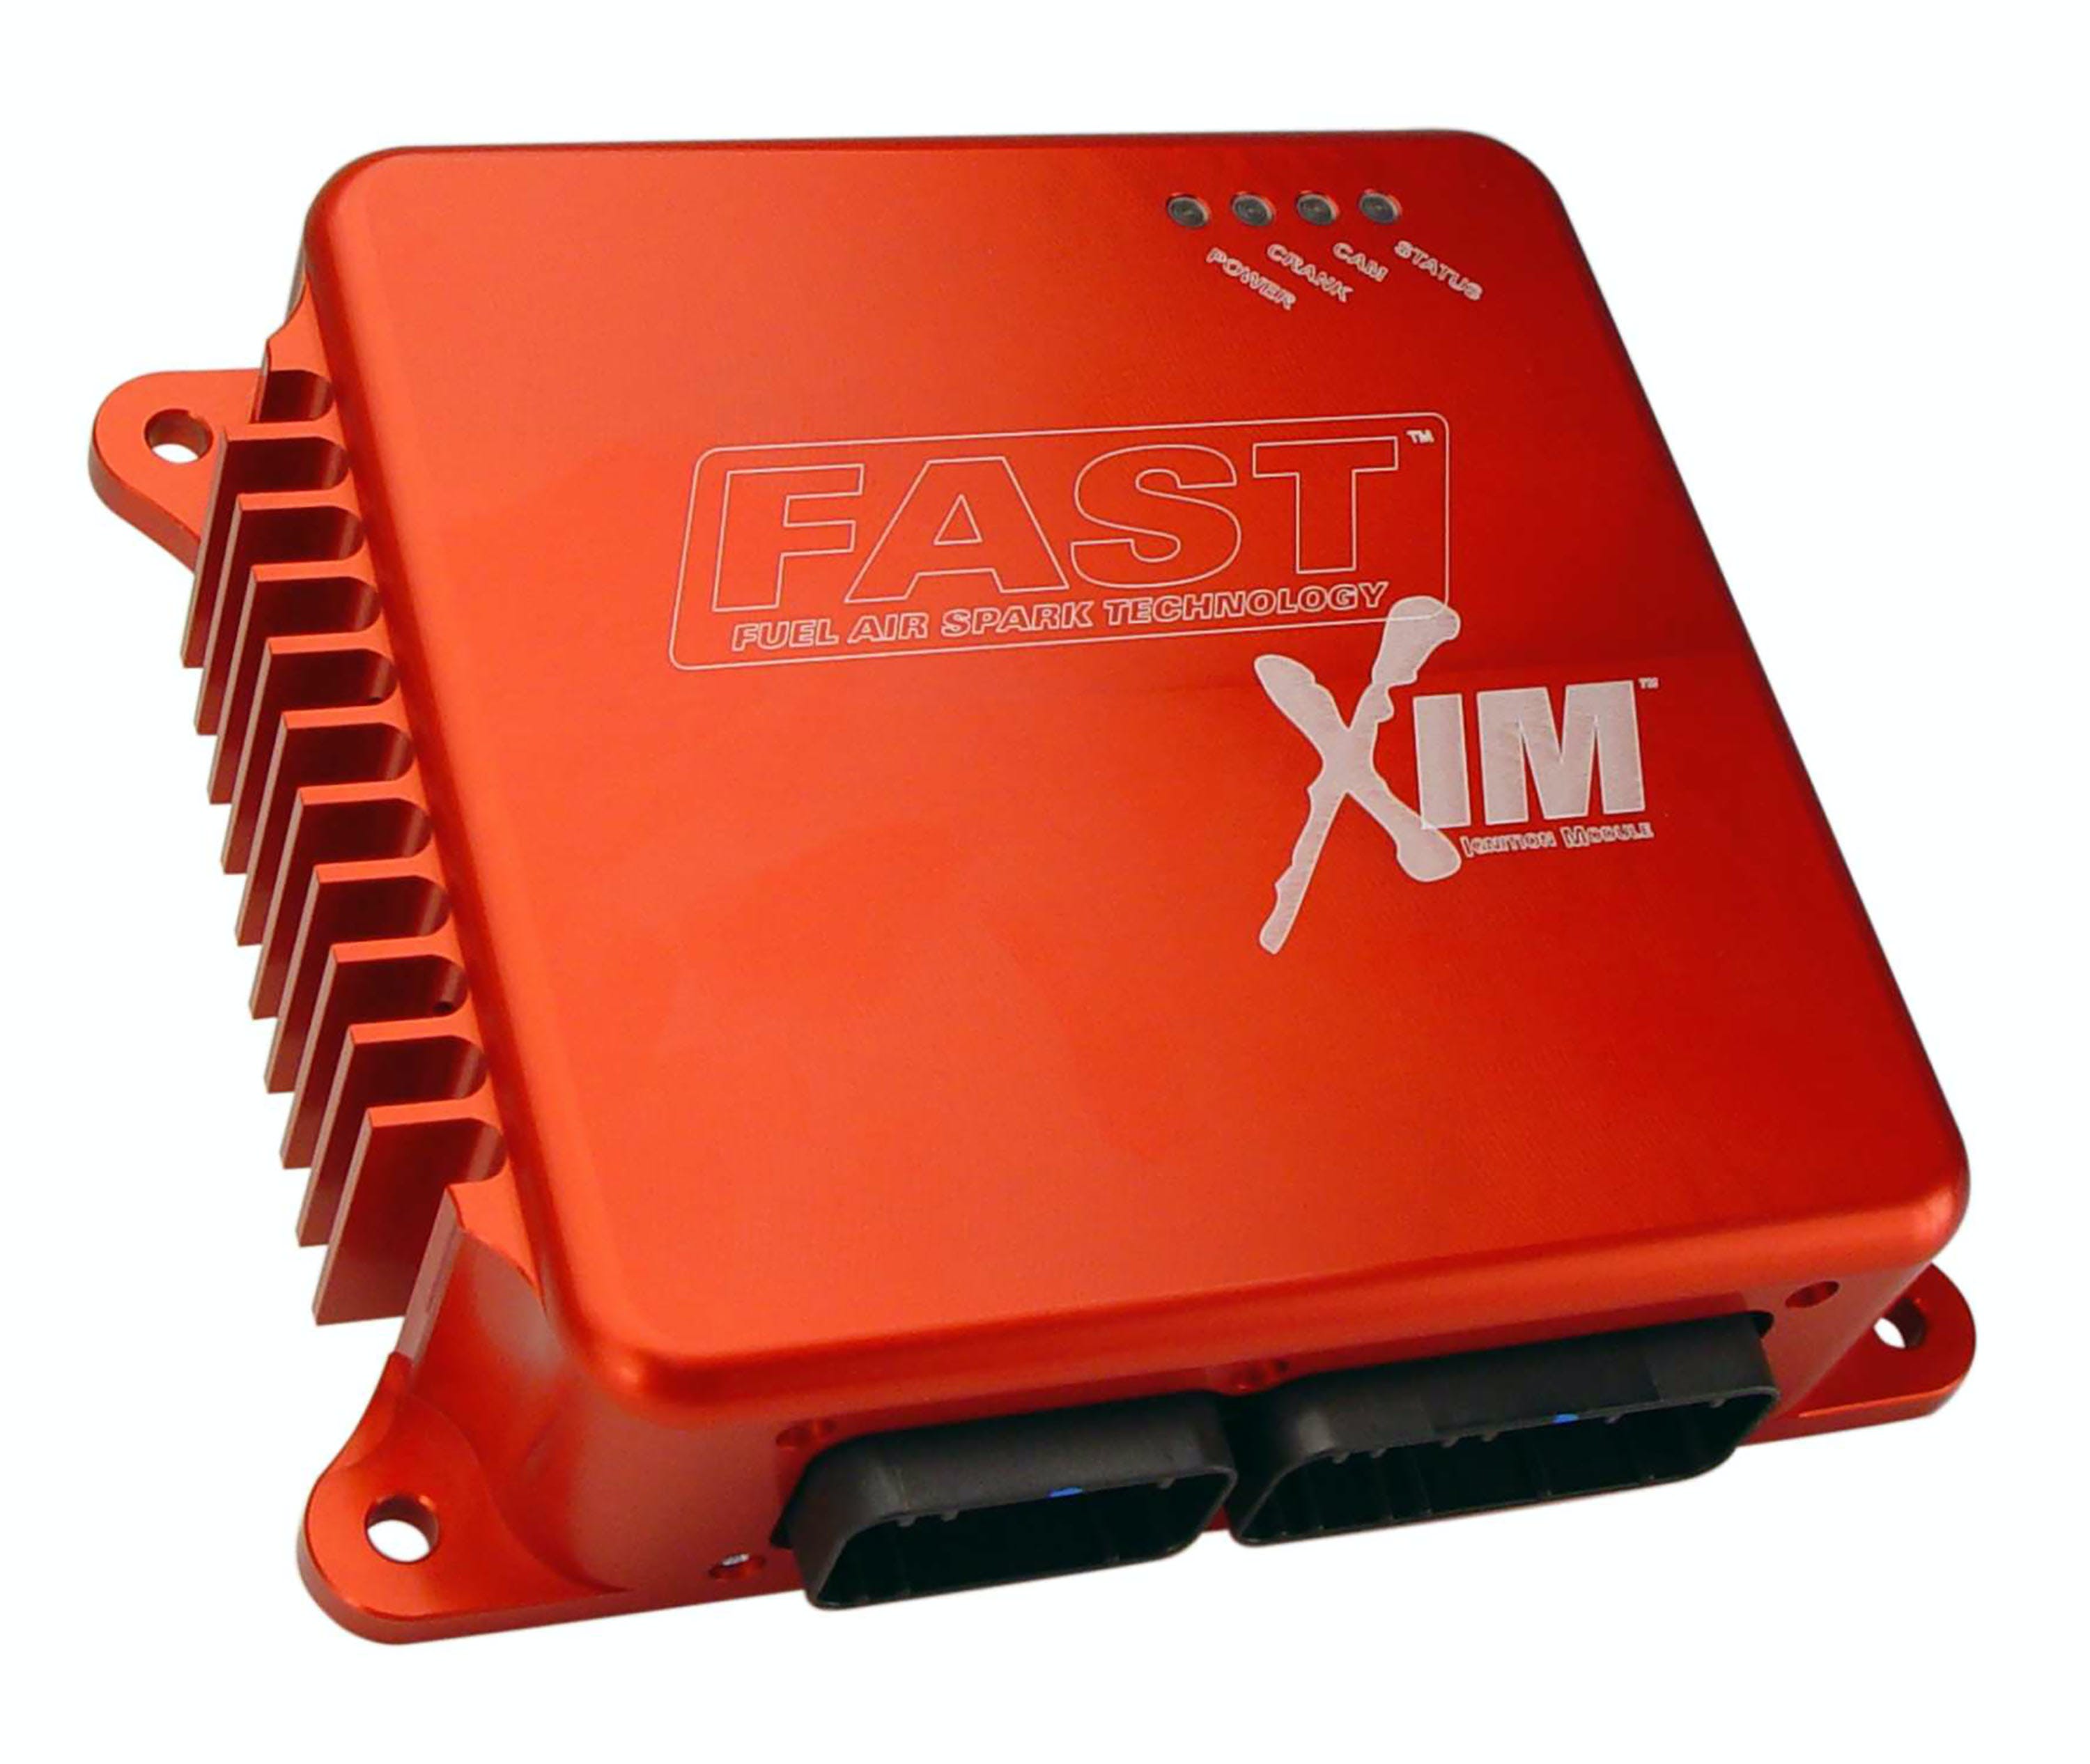 FAST - Fuel Air Spark Technology 305008 The XIM controls ignition timing on coil per cylinder and waste spark ignition.